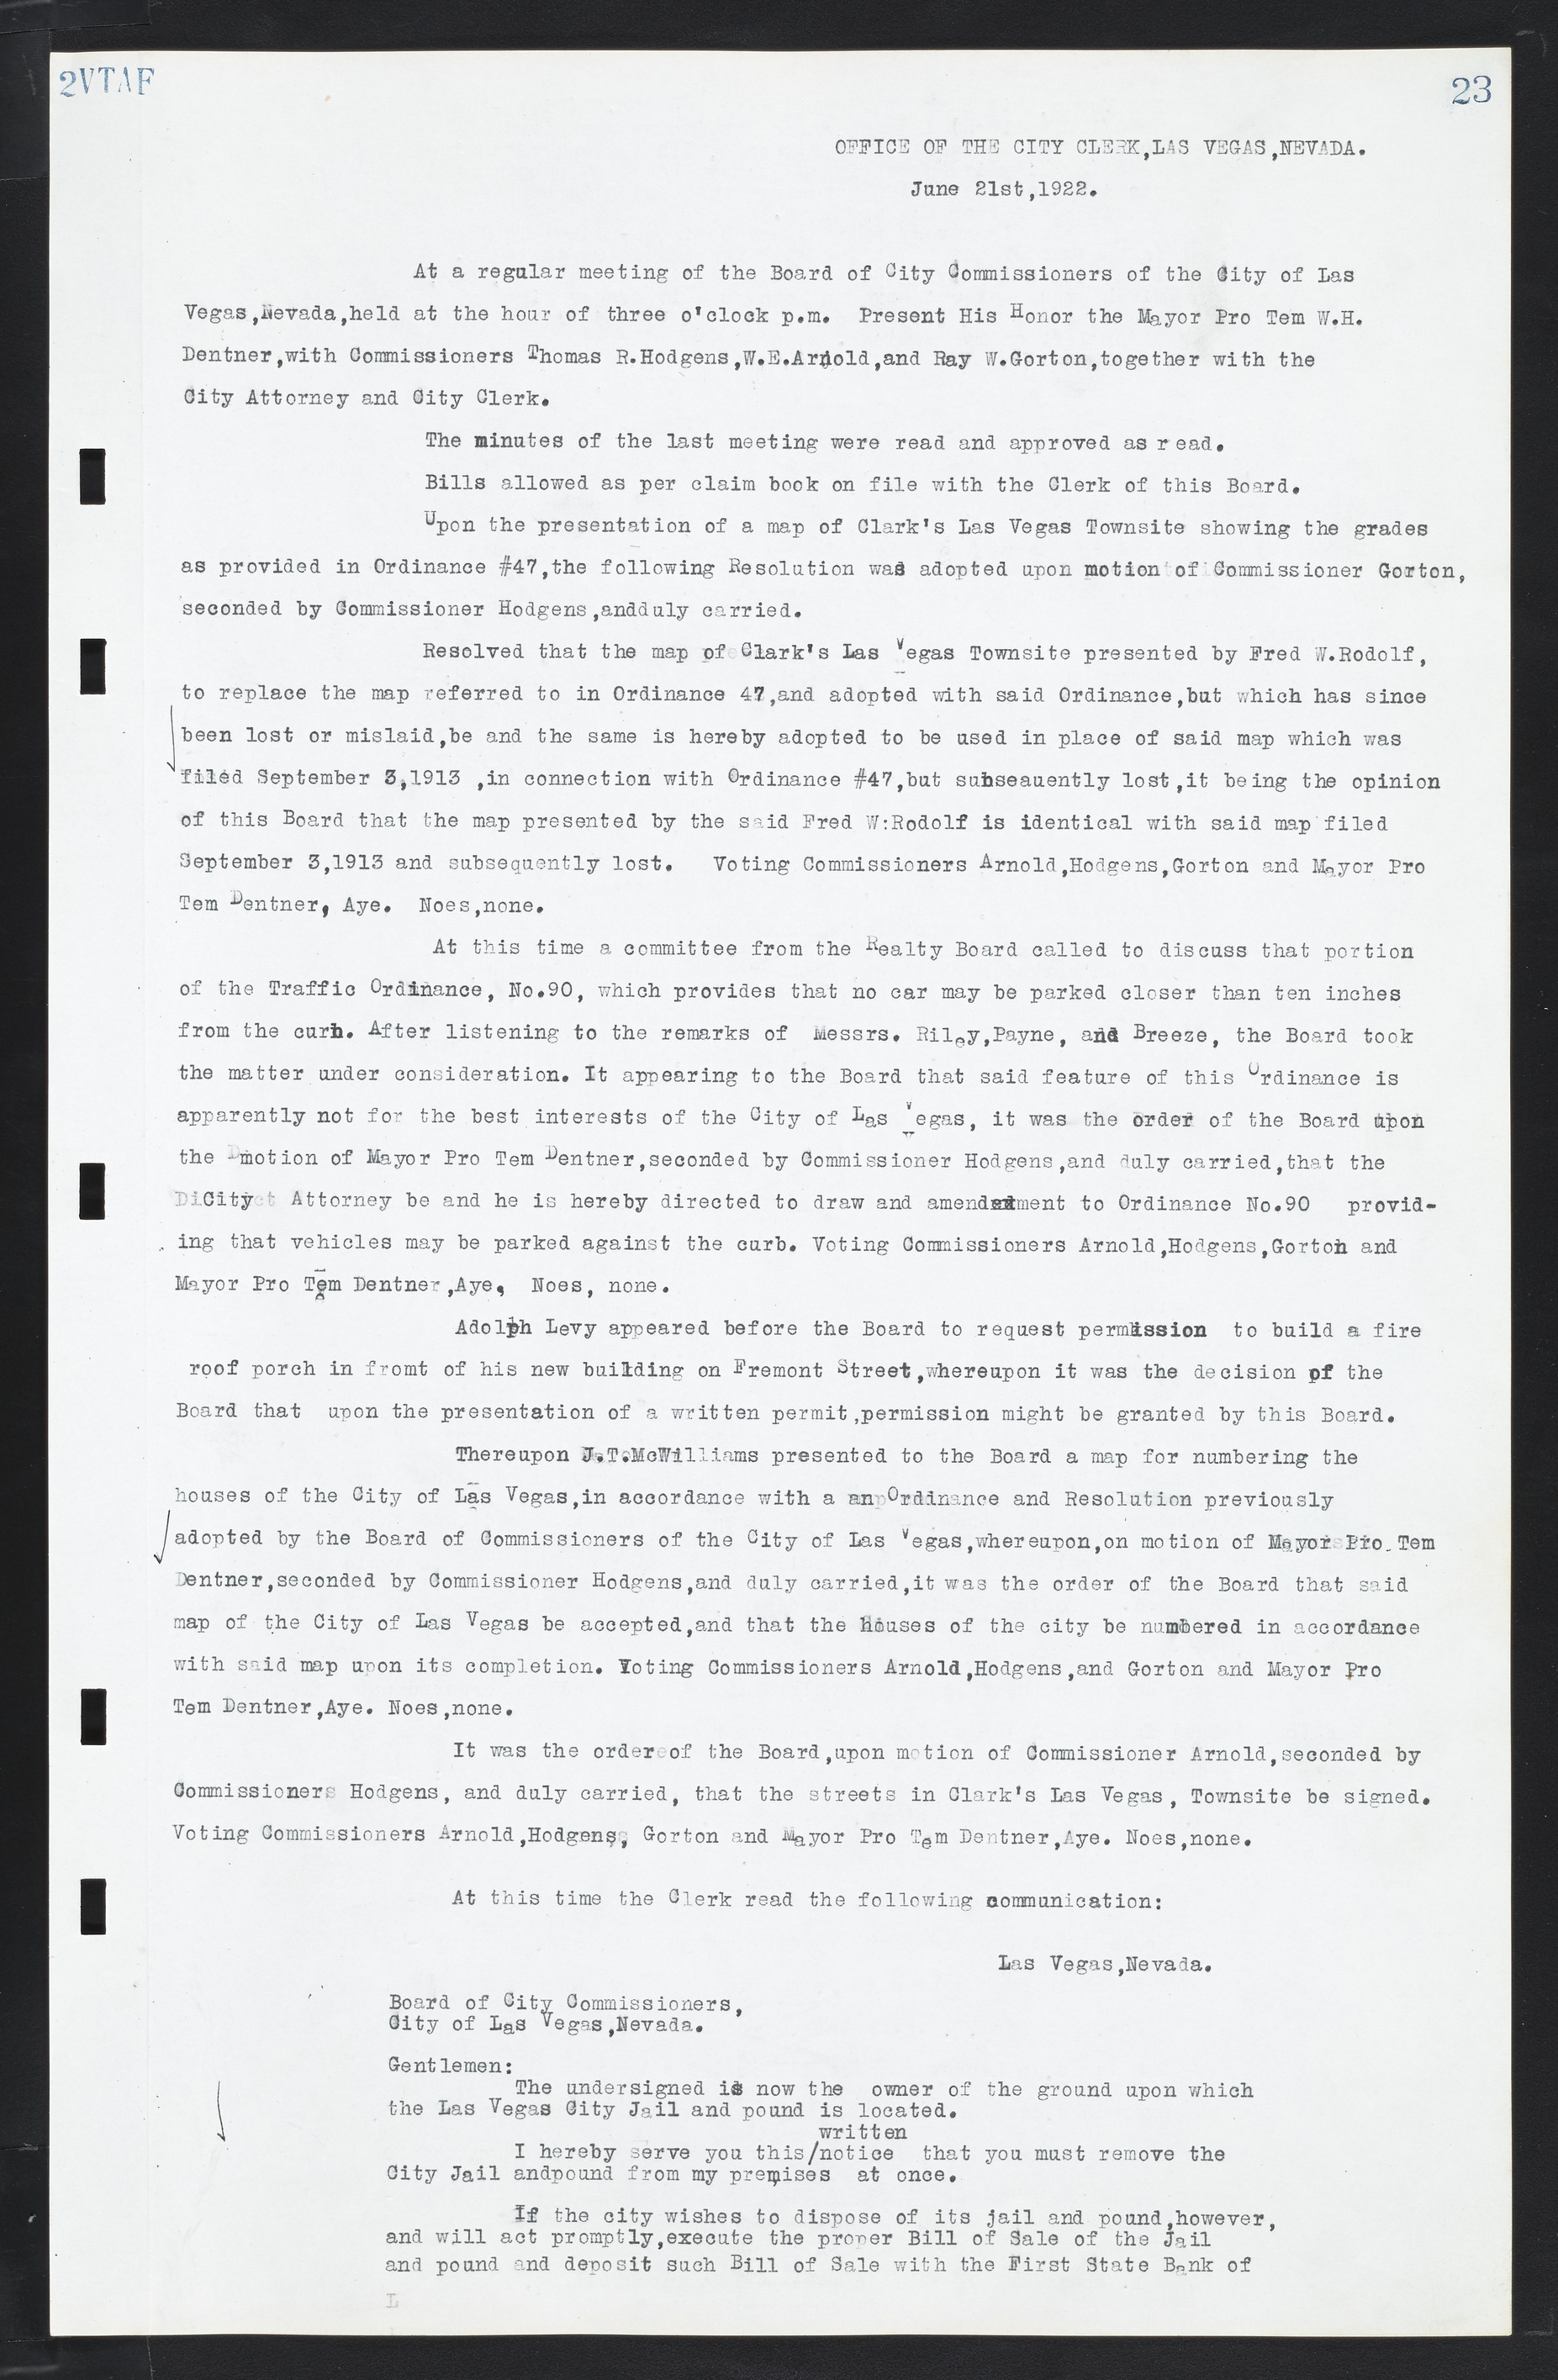 Las Vegas City Commission Minutes, March 1, 1922 to May 10, 1929, lvc000002-30